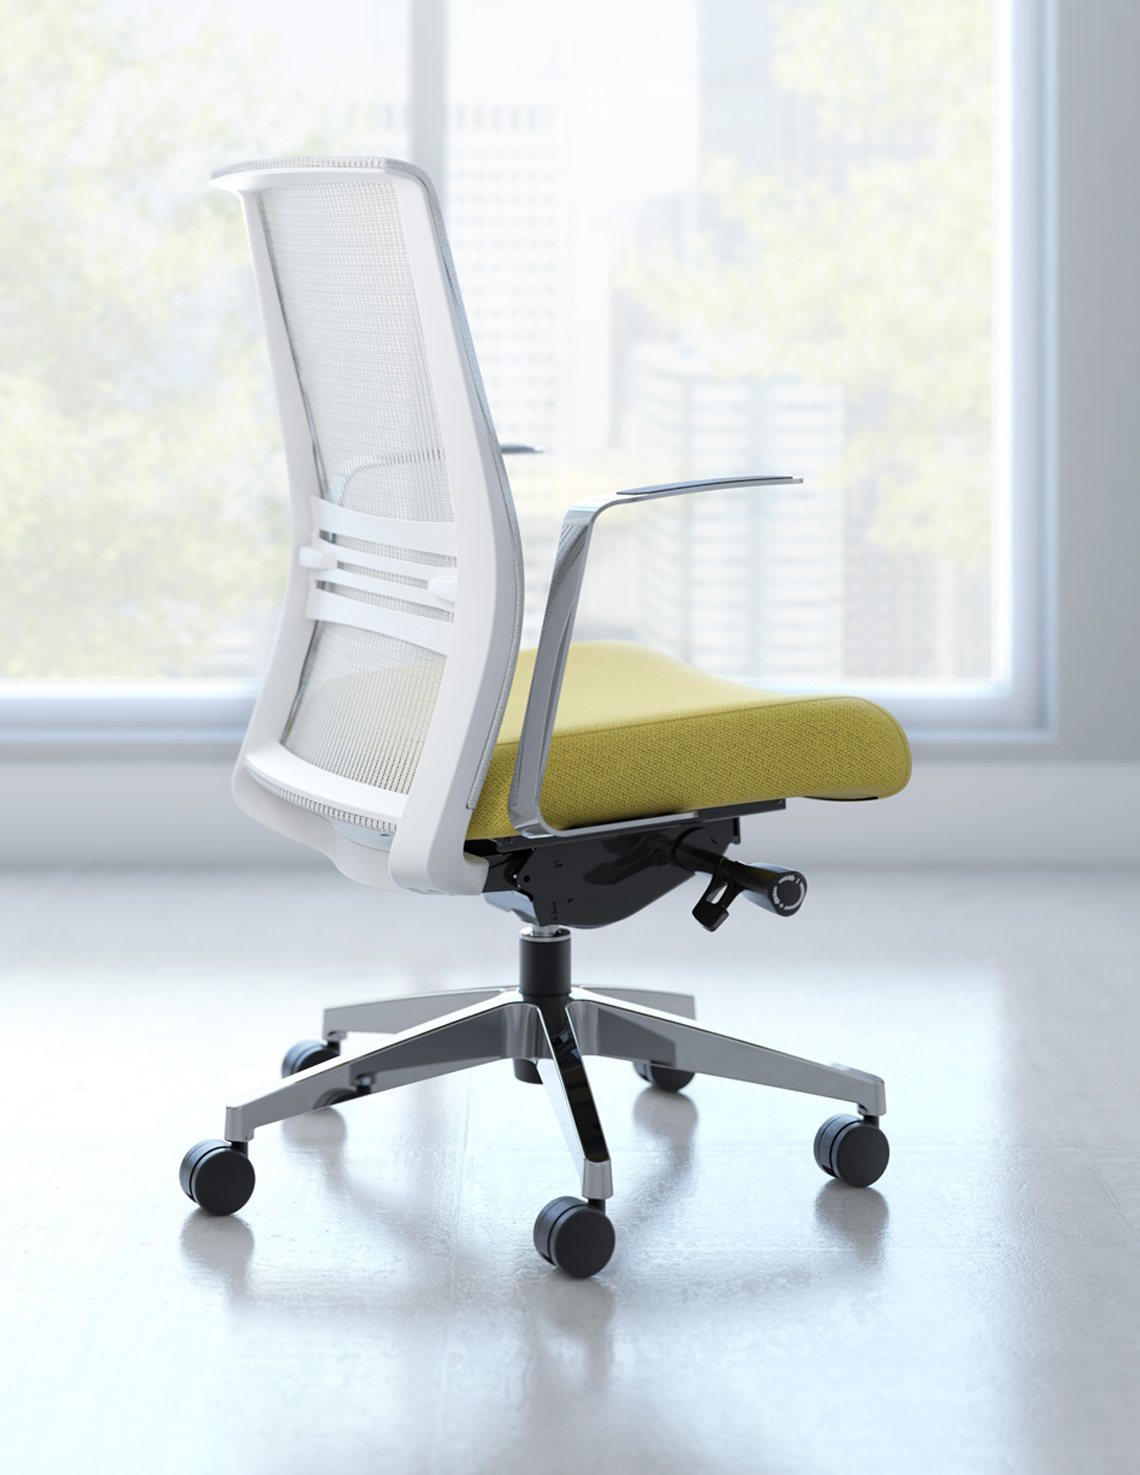 This task chair is an ergonomic and sophisticated solution for active work areas